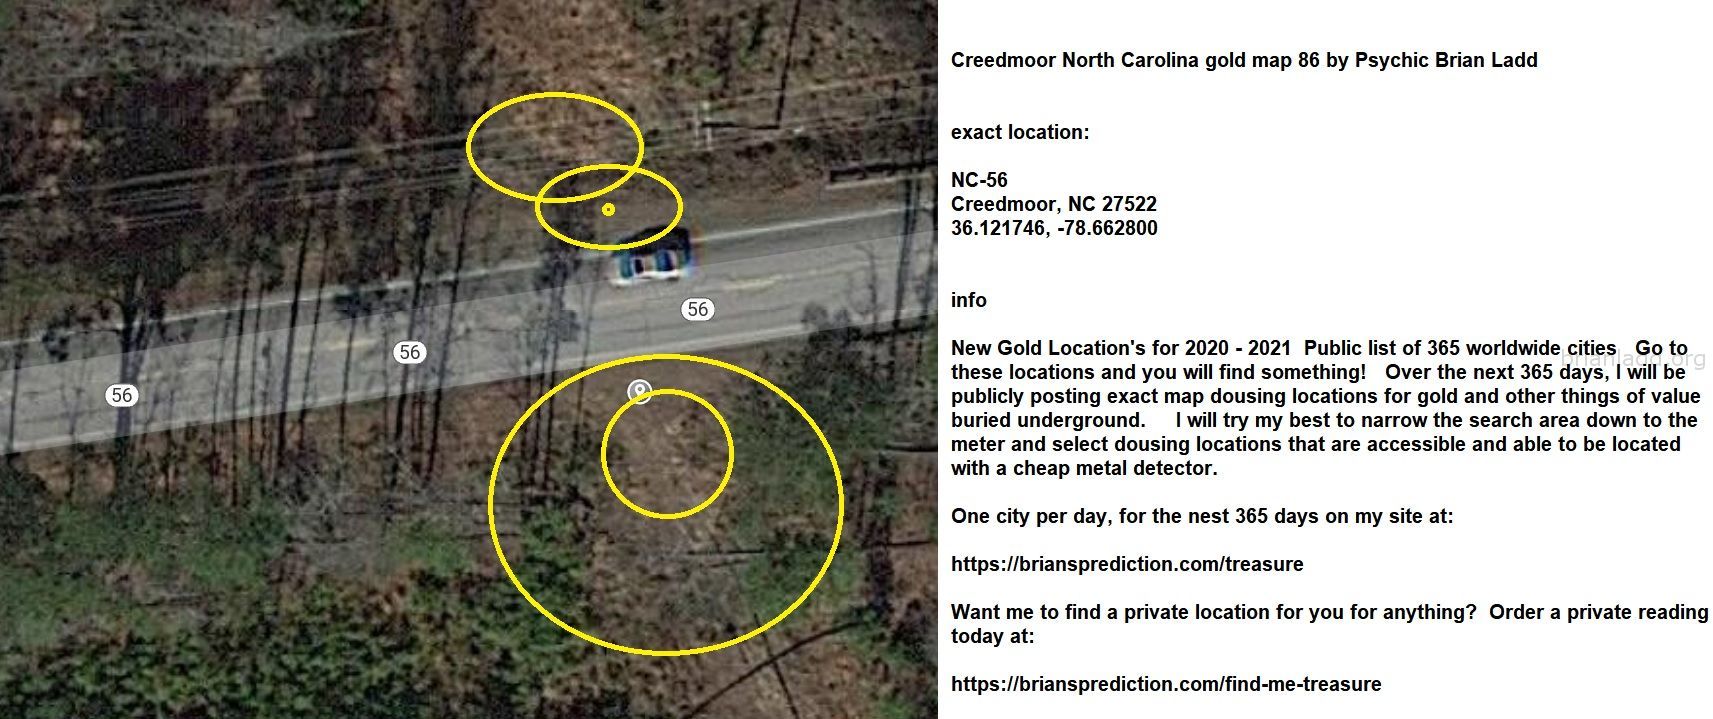 Creedmoor North Carolina gold map 86 by Psychic Brian Ladd
New Gold Location's for 2020 - 2021  Public list of 365 worldwide cities   Go to these locations and you will find something!   Over the next 365 days, I will be publicly posting exact map dousing locations for gold and other things of value buried underground.     I will try my best to narrow the search area down to the meter and select dousing locations that are accessible and able to be located with a cheap metal detector. One city per day, for the nest 365 days on my site at:  https://briansprediction.com/treasure  Want me to find a private location for you for anything?  Order a private reading today at:  https://briansprediction.com/find-me-treasure
